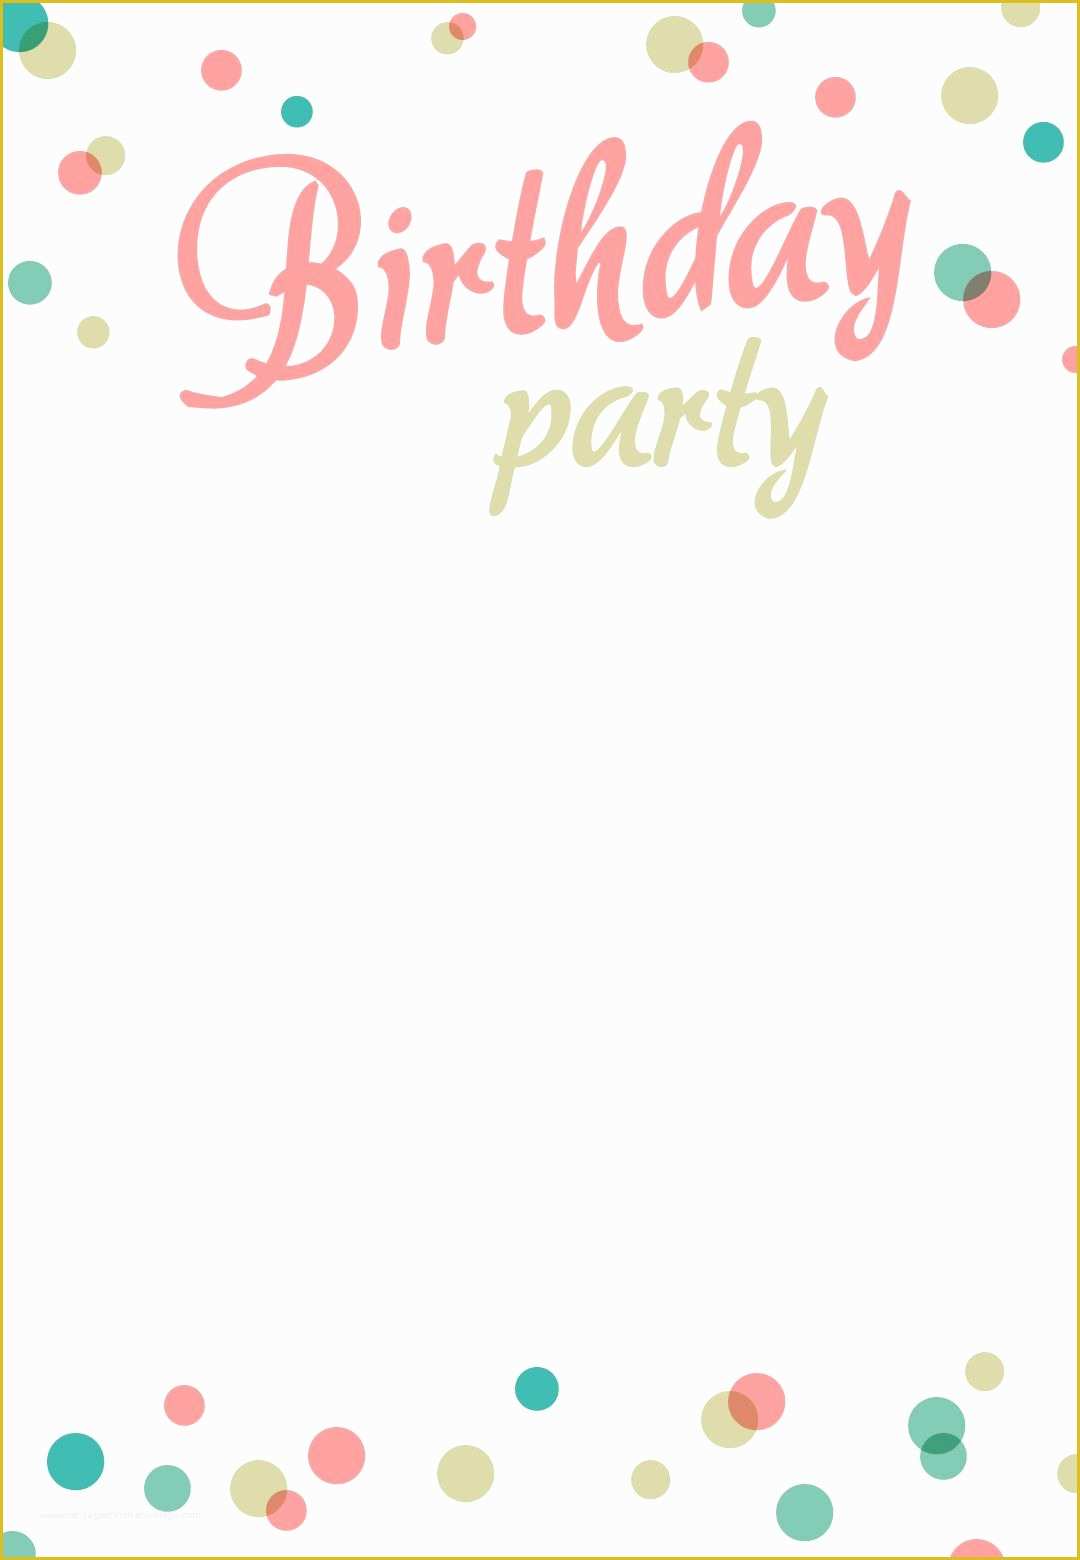 Birthday Wishes Templates Free Download Of Birthday Party Invitation Free Printable